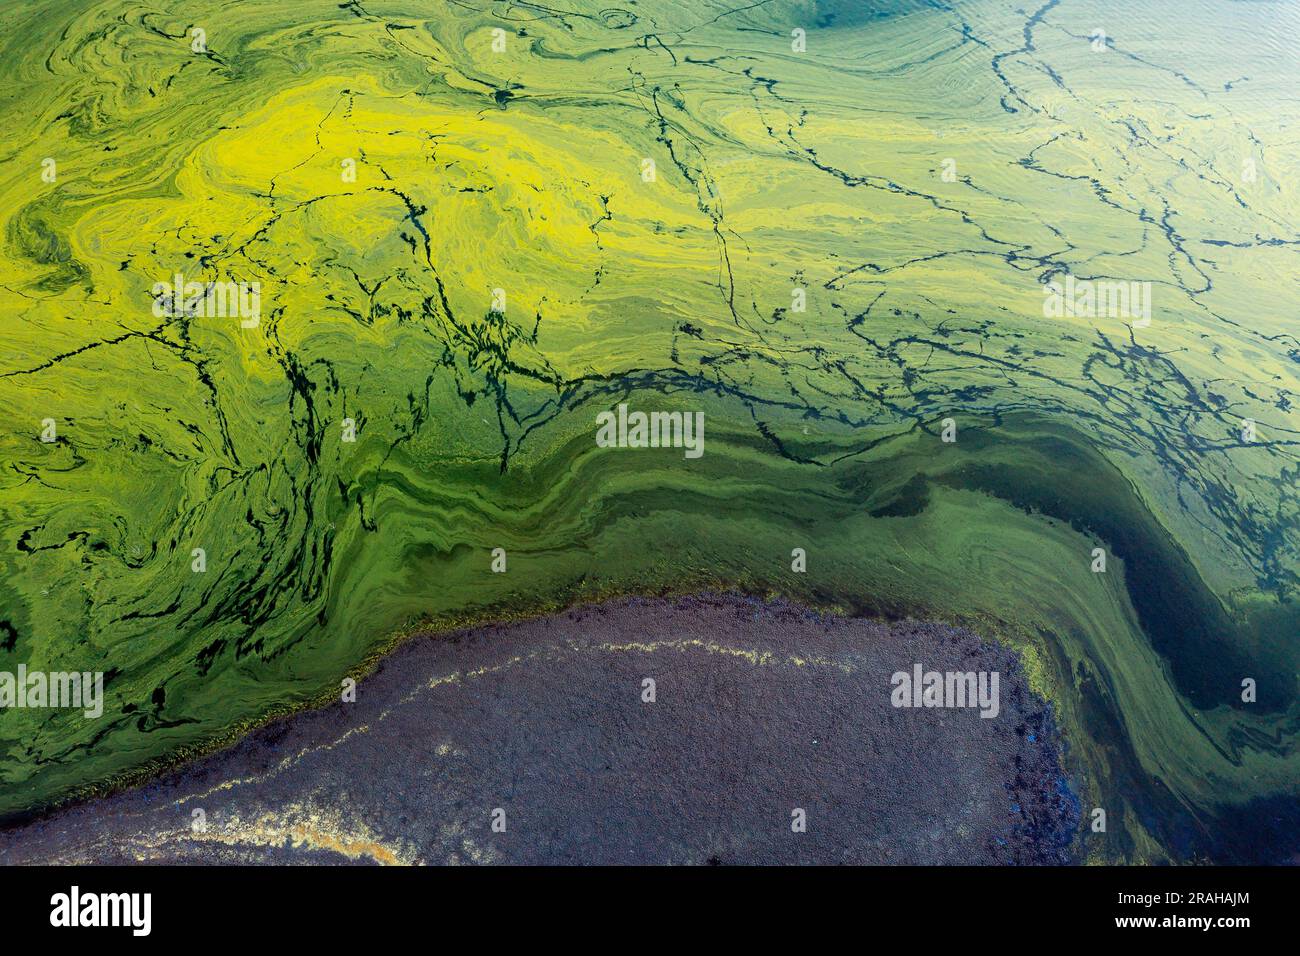 Aerial view of patterns in blue green algae on the waters surface of Lake Eildon in Victoria, Australia Stock Photo